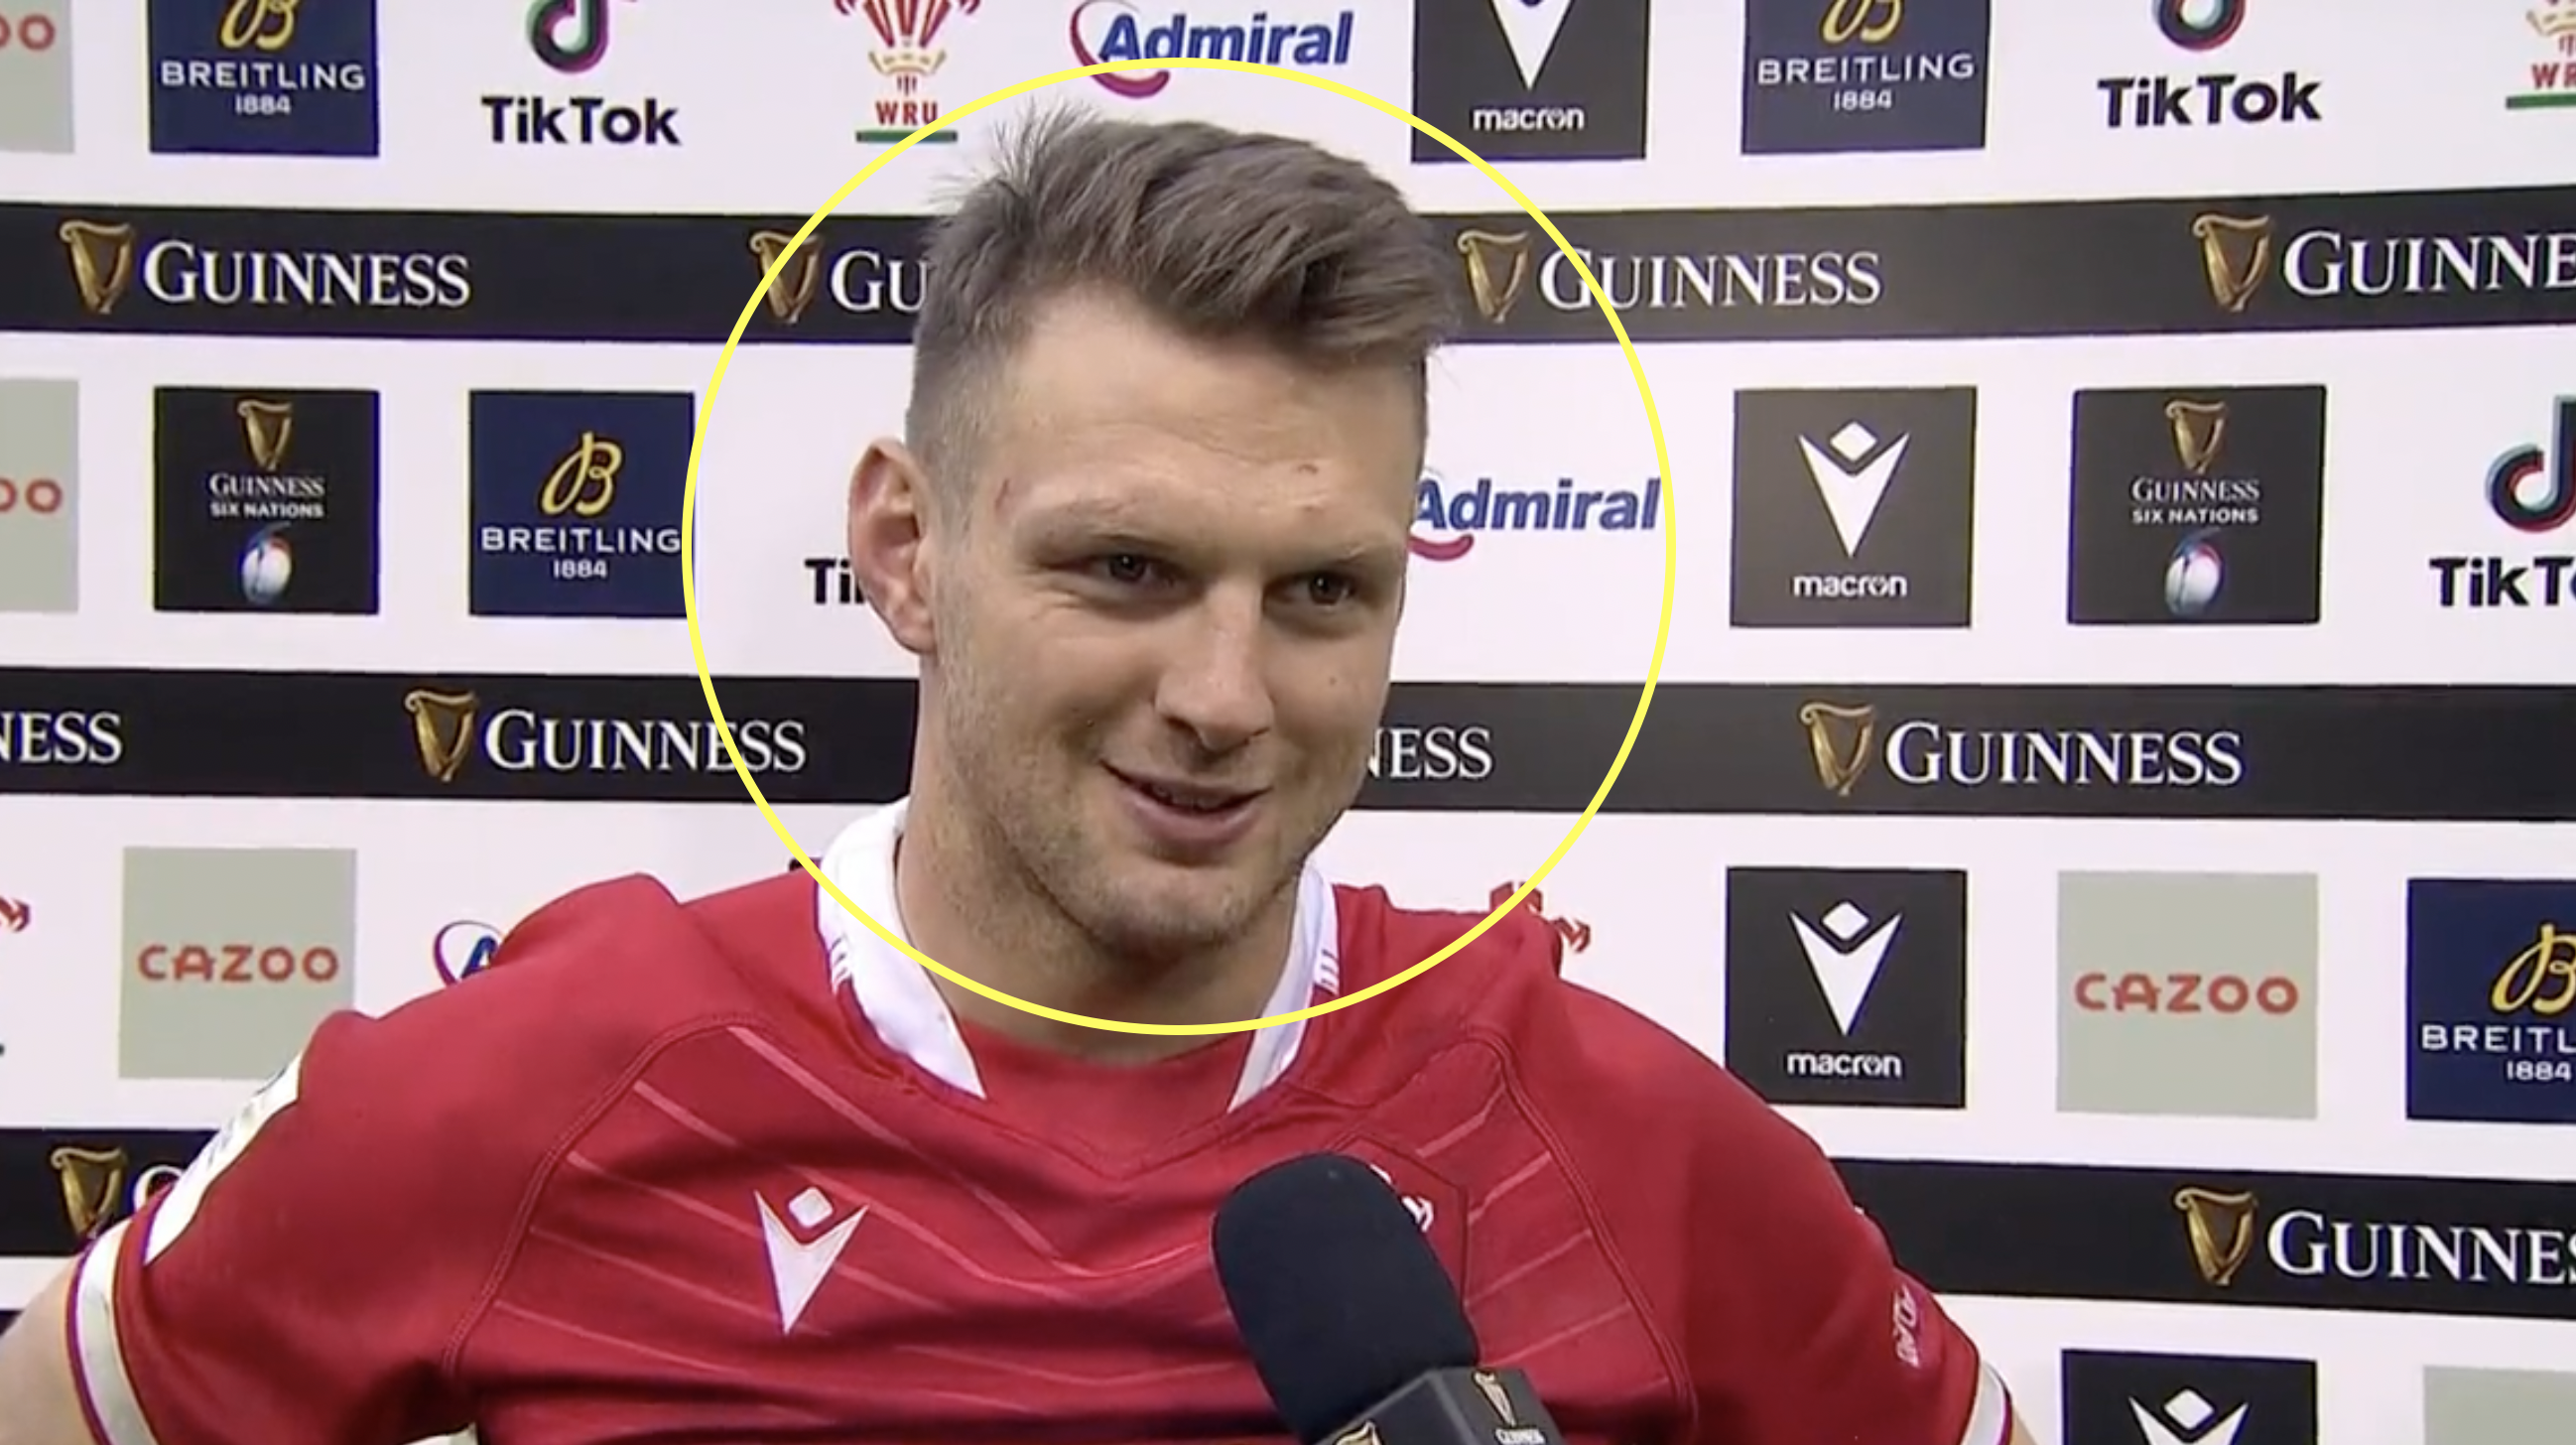 Dan Biggar's crafty illegal trick wins the game for Wales